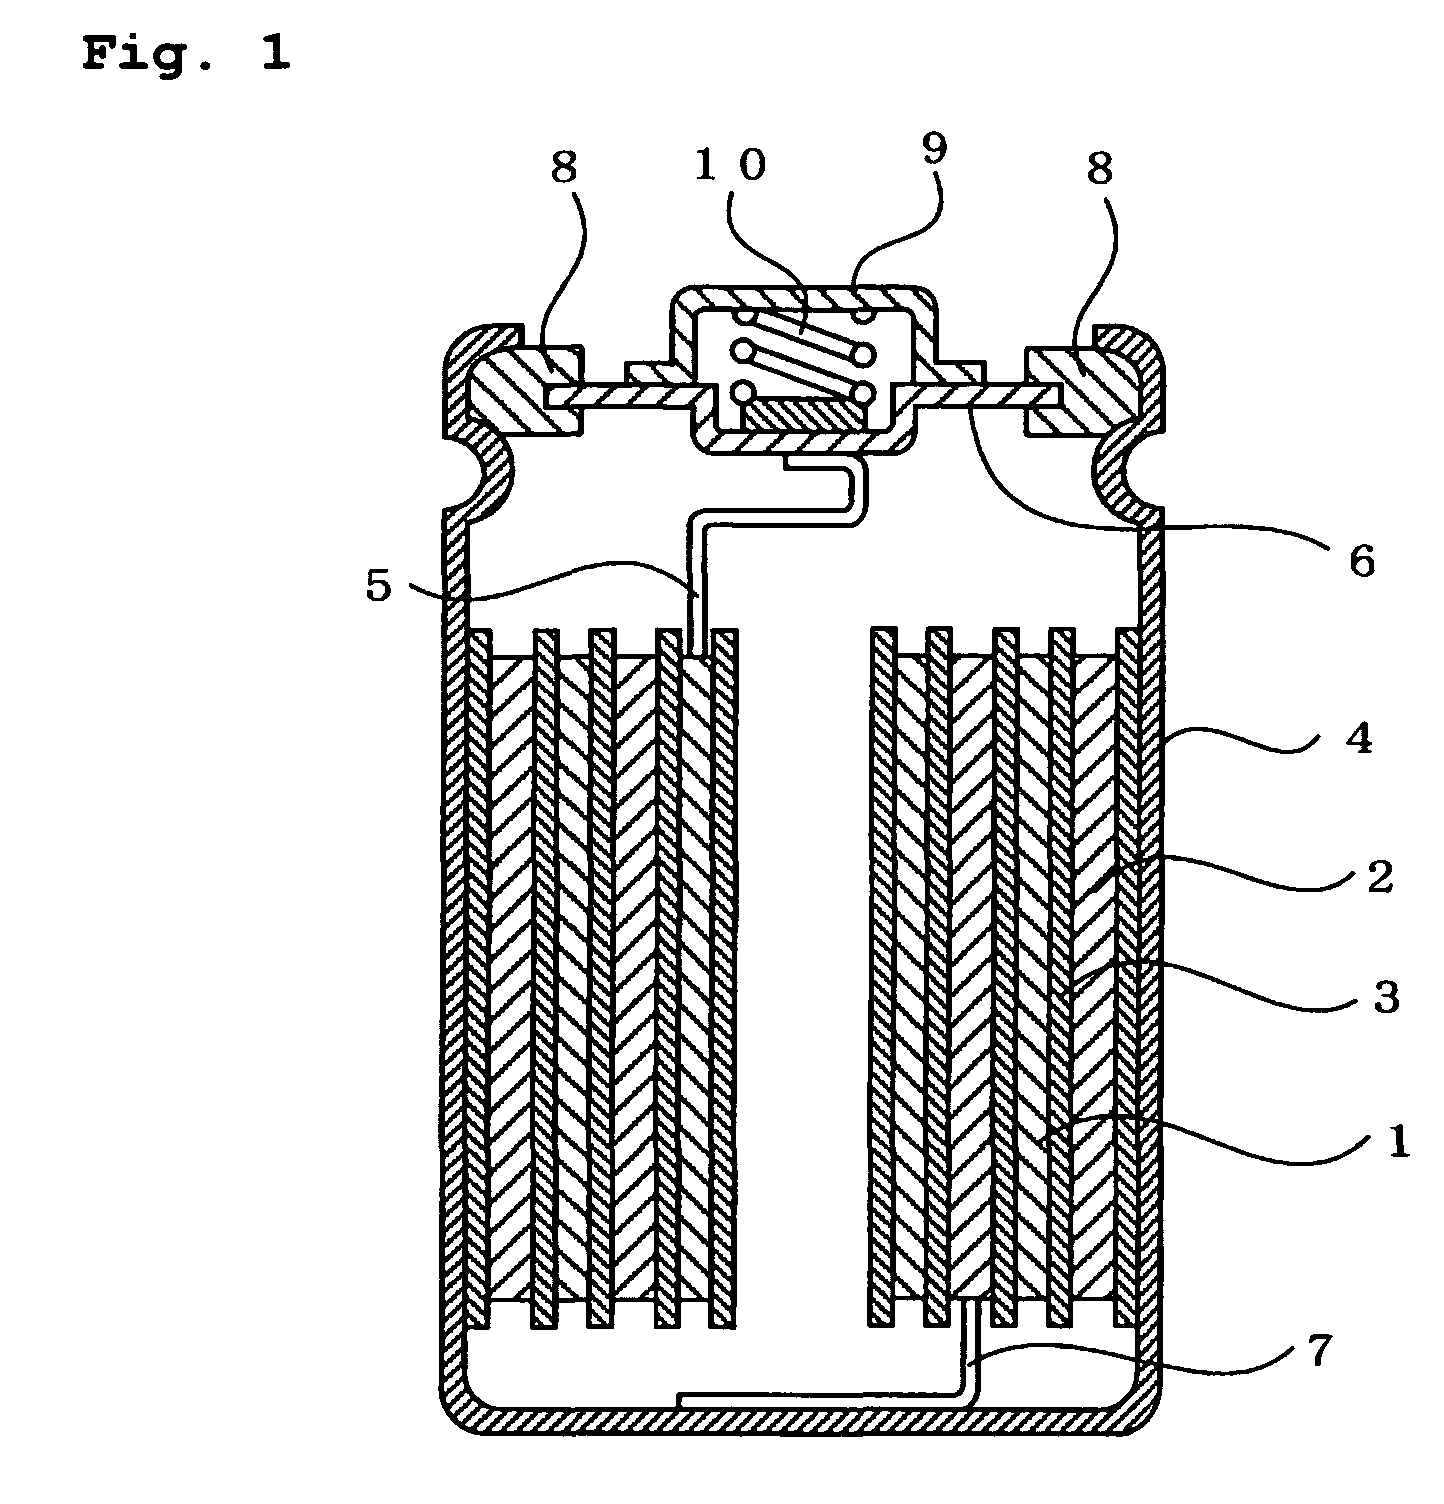 Hydrogen-absorbing alloy electrode, alkaline storage battery, and method of manufacturing the alkaline storage battery